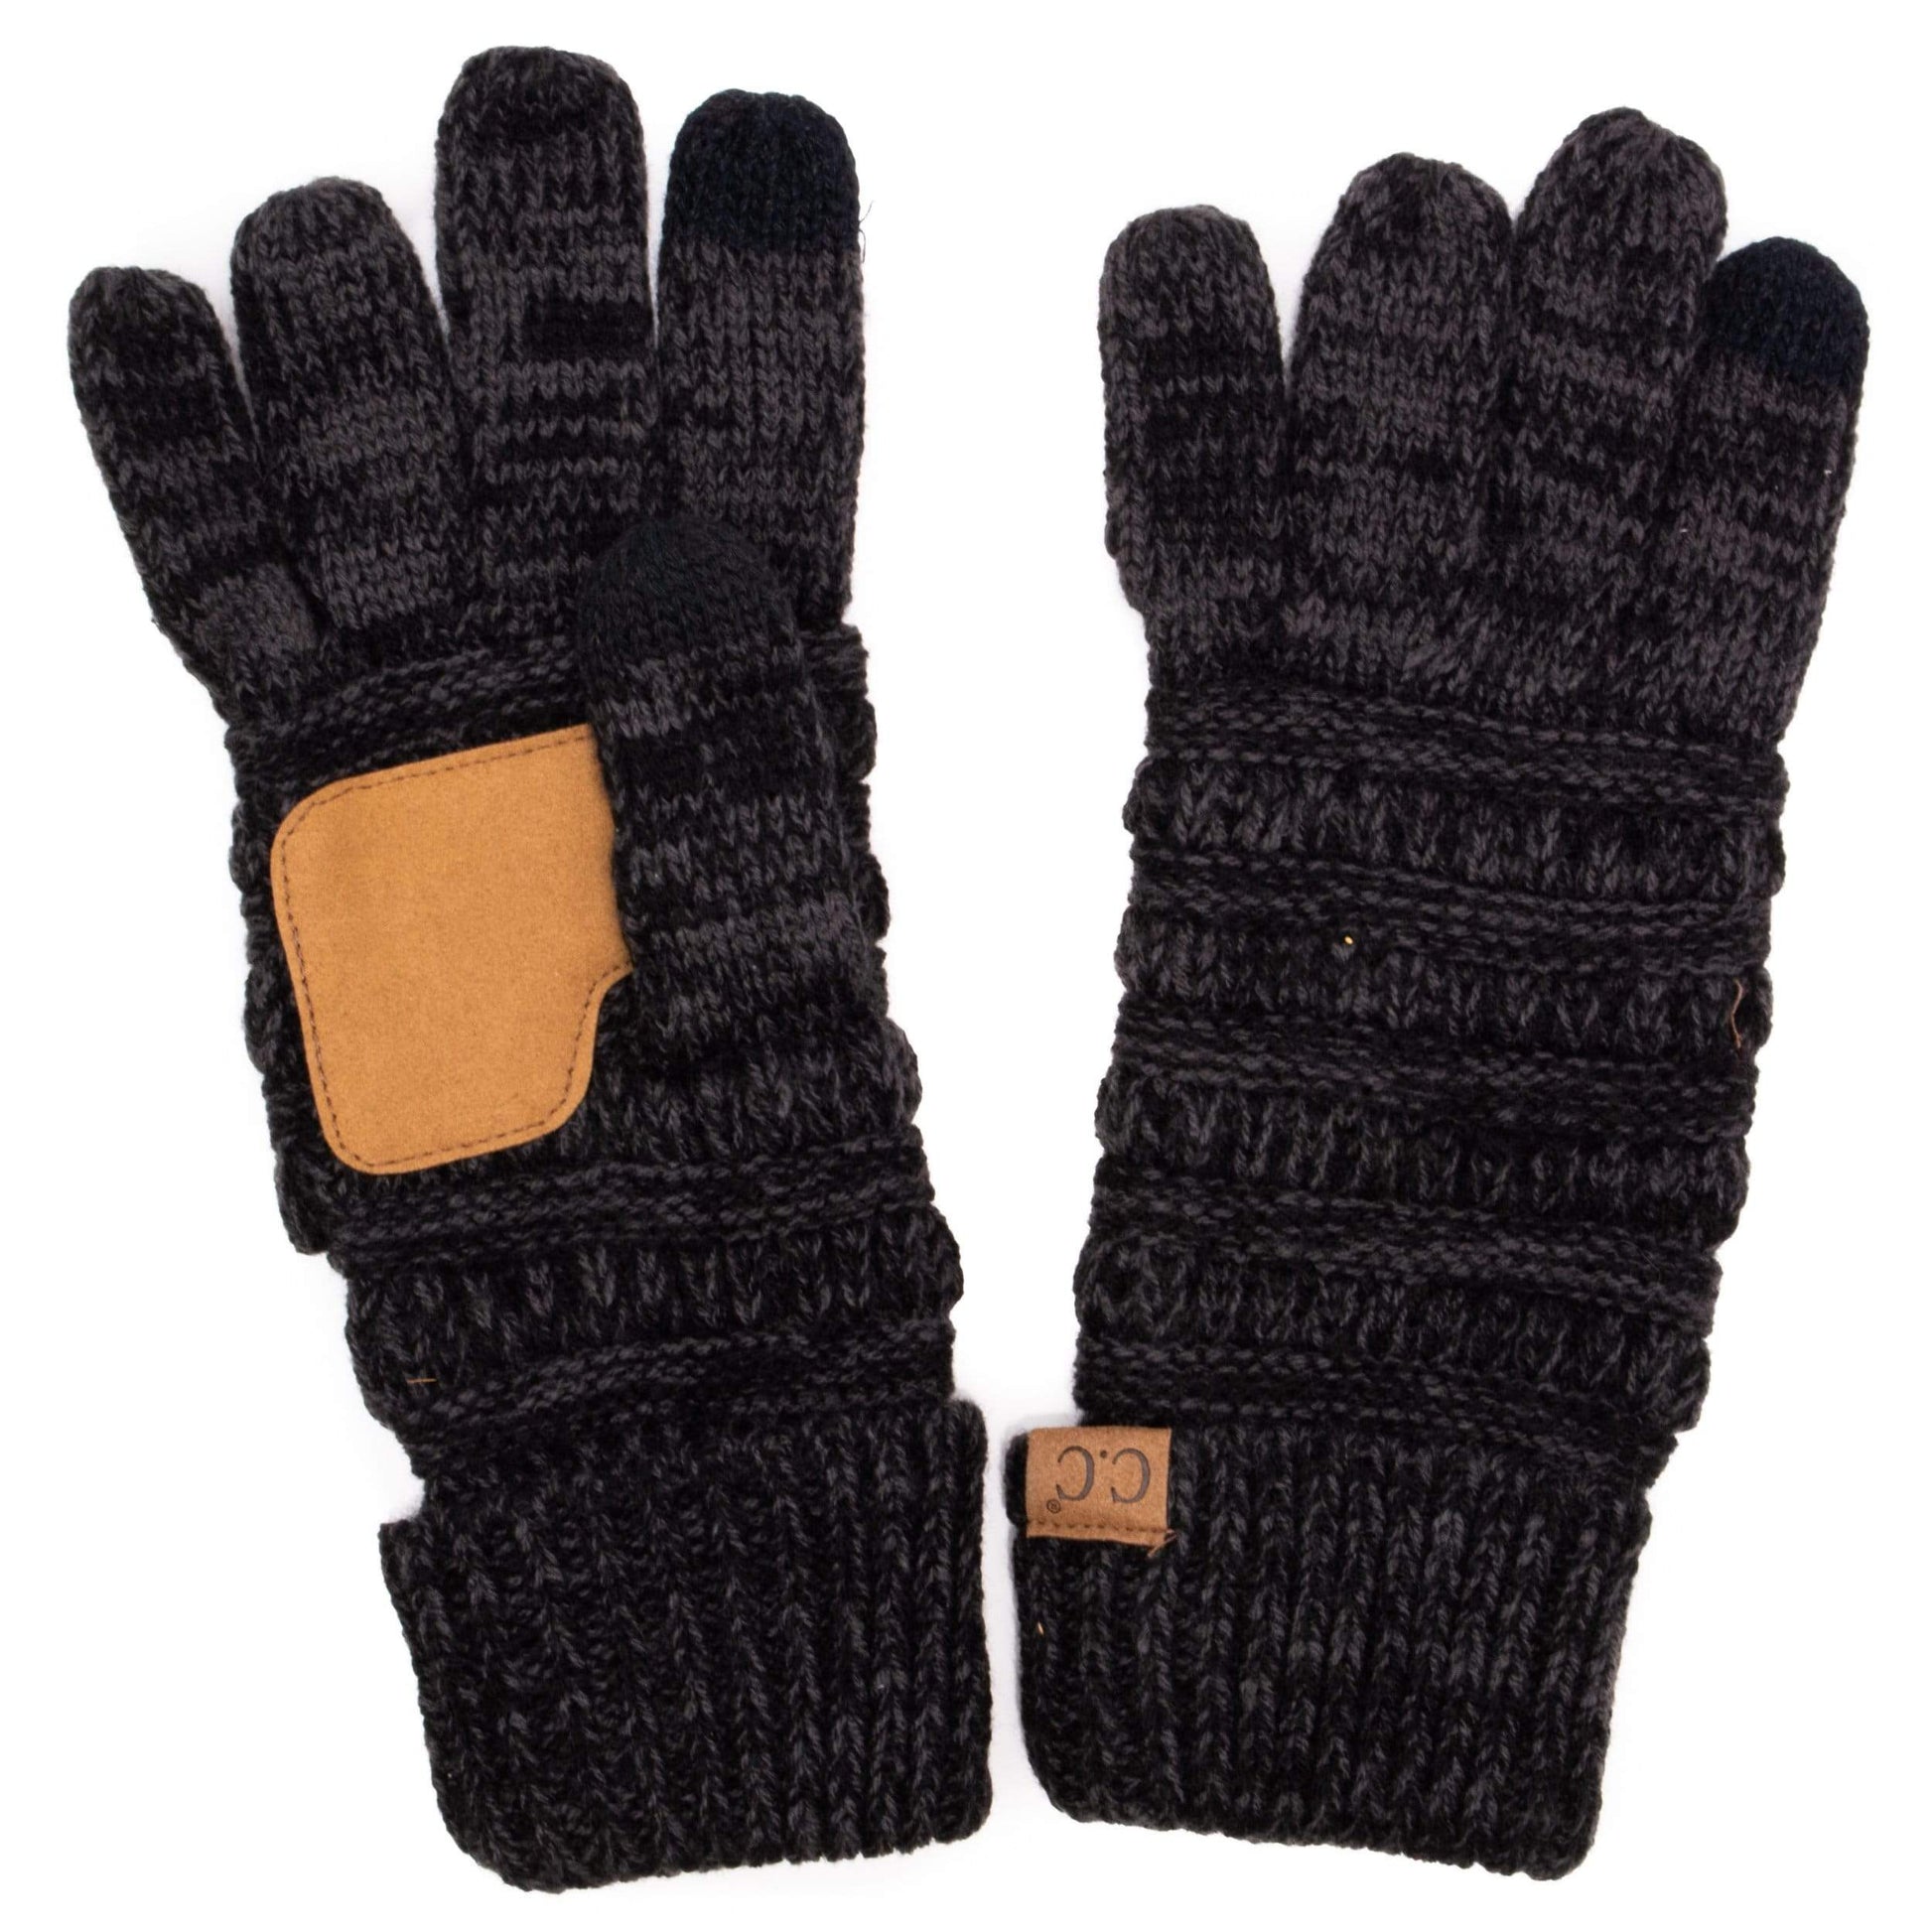 C.C Apparel Black/Grey C.C Unisex Cable Knit Winter Warm Anti-Slip Two-Toned Touchscreen Texting Gloves